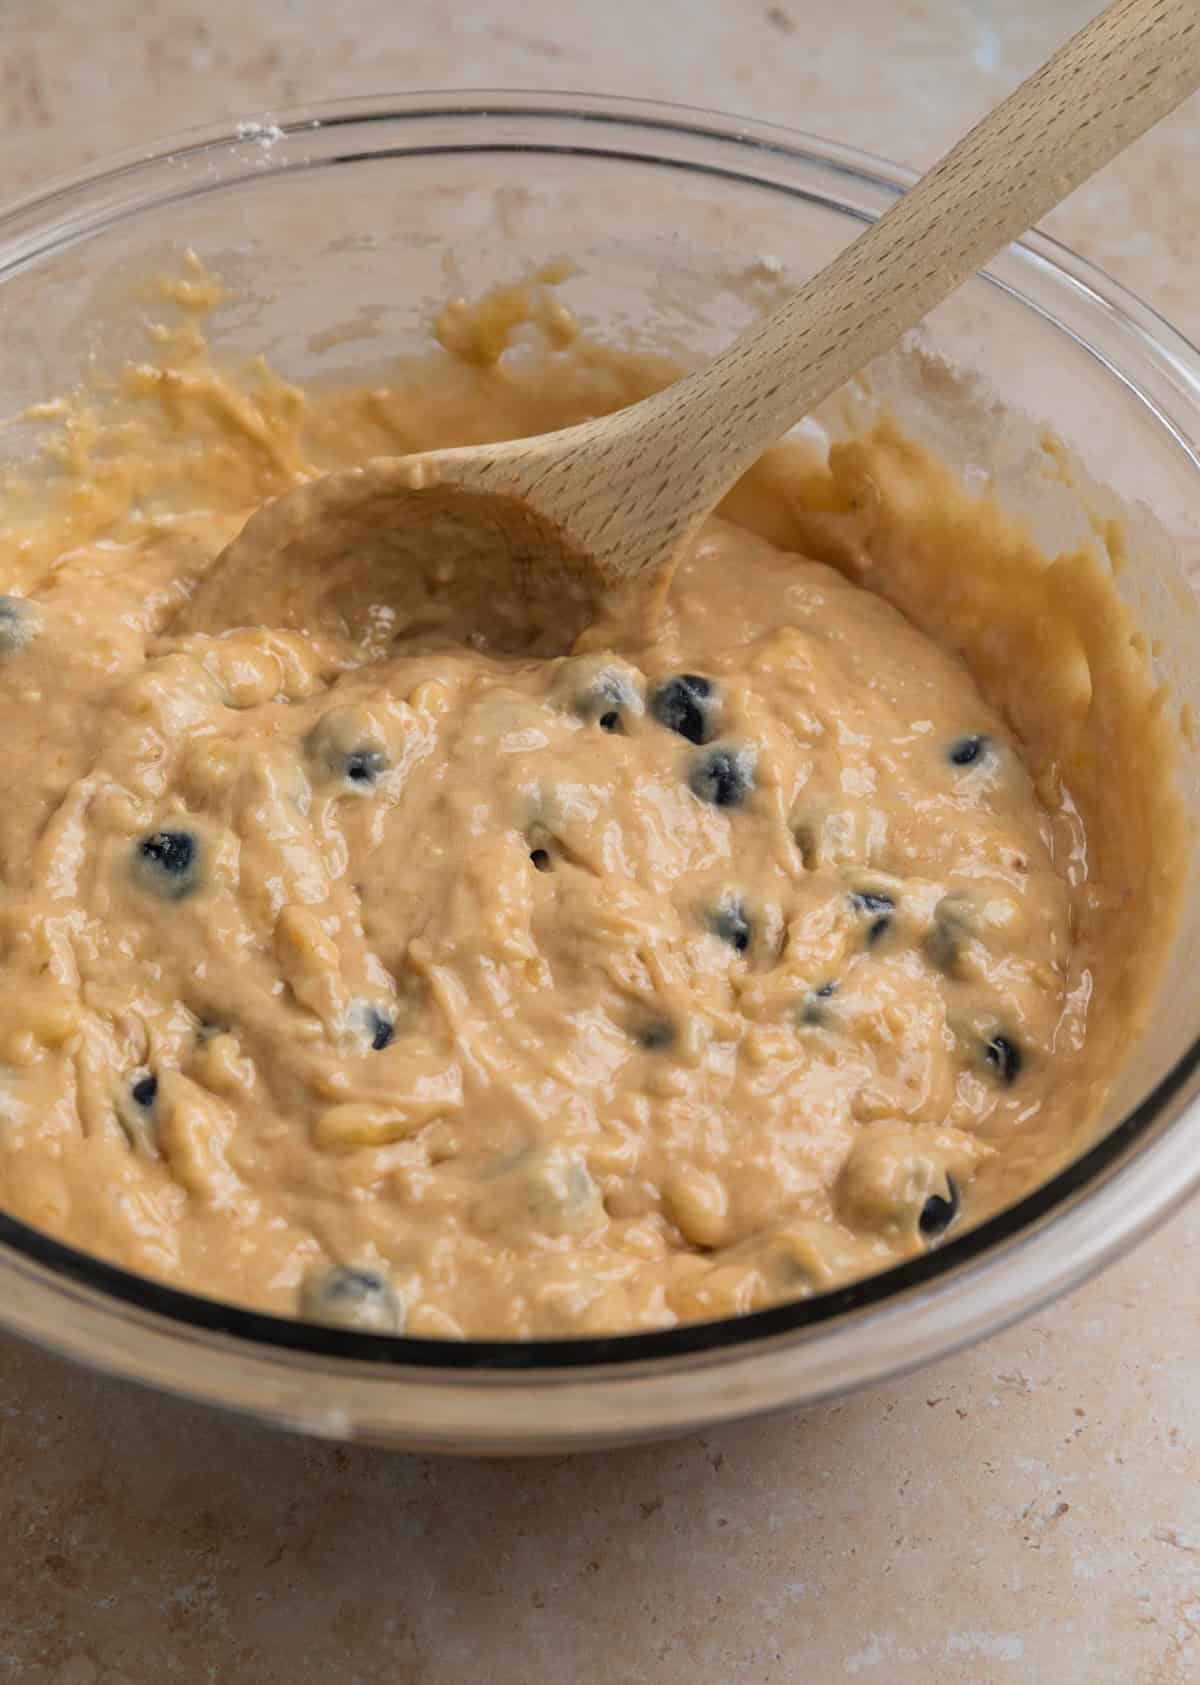 Prepared blueberry banana muffin batter in bowl with wood spoon.